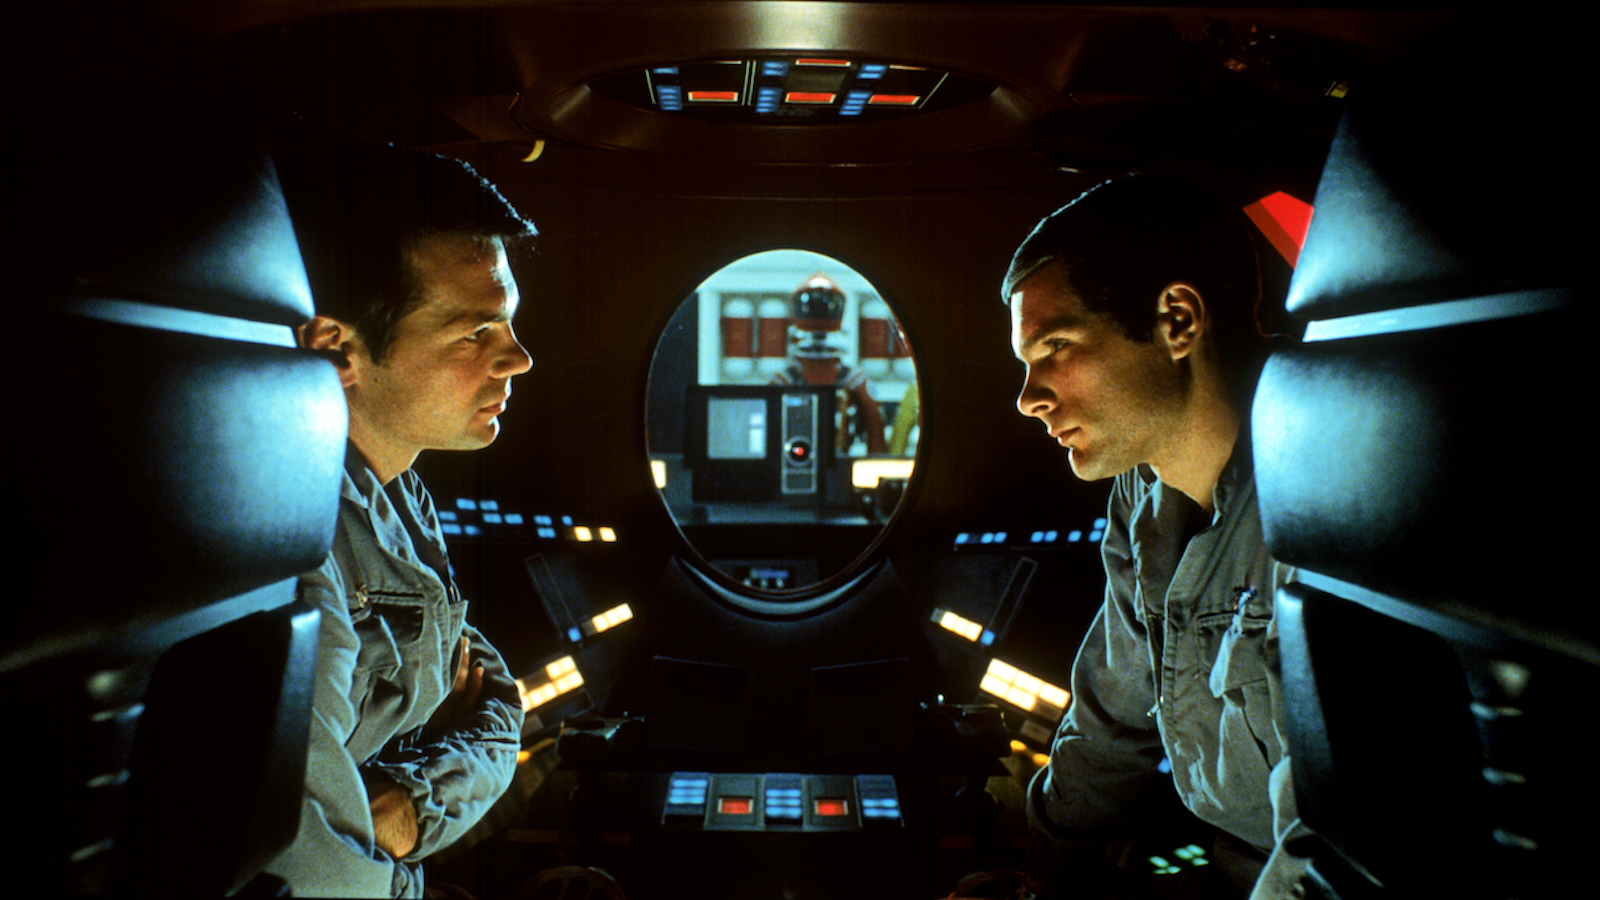 Two astronauts in profile sit in an enclosed pod and discuss with an oval shaped window behind them showing a computer's red light pointed in the direction of the camera